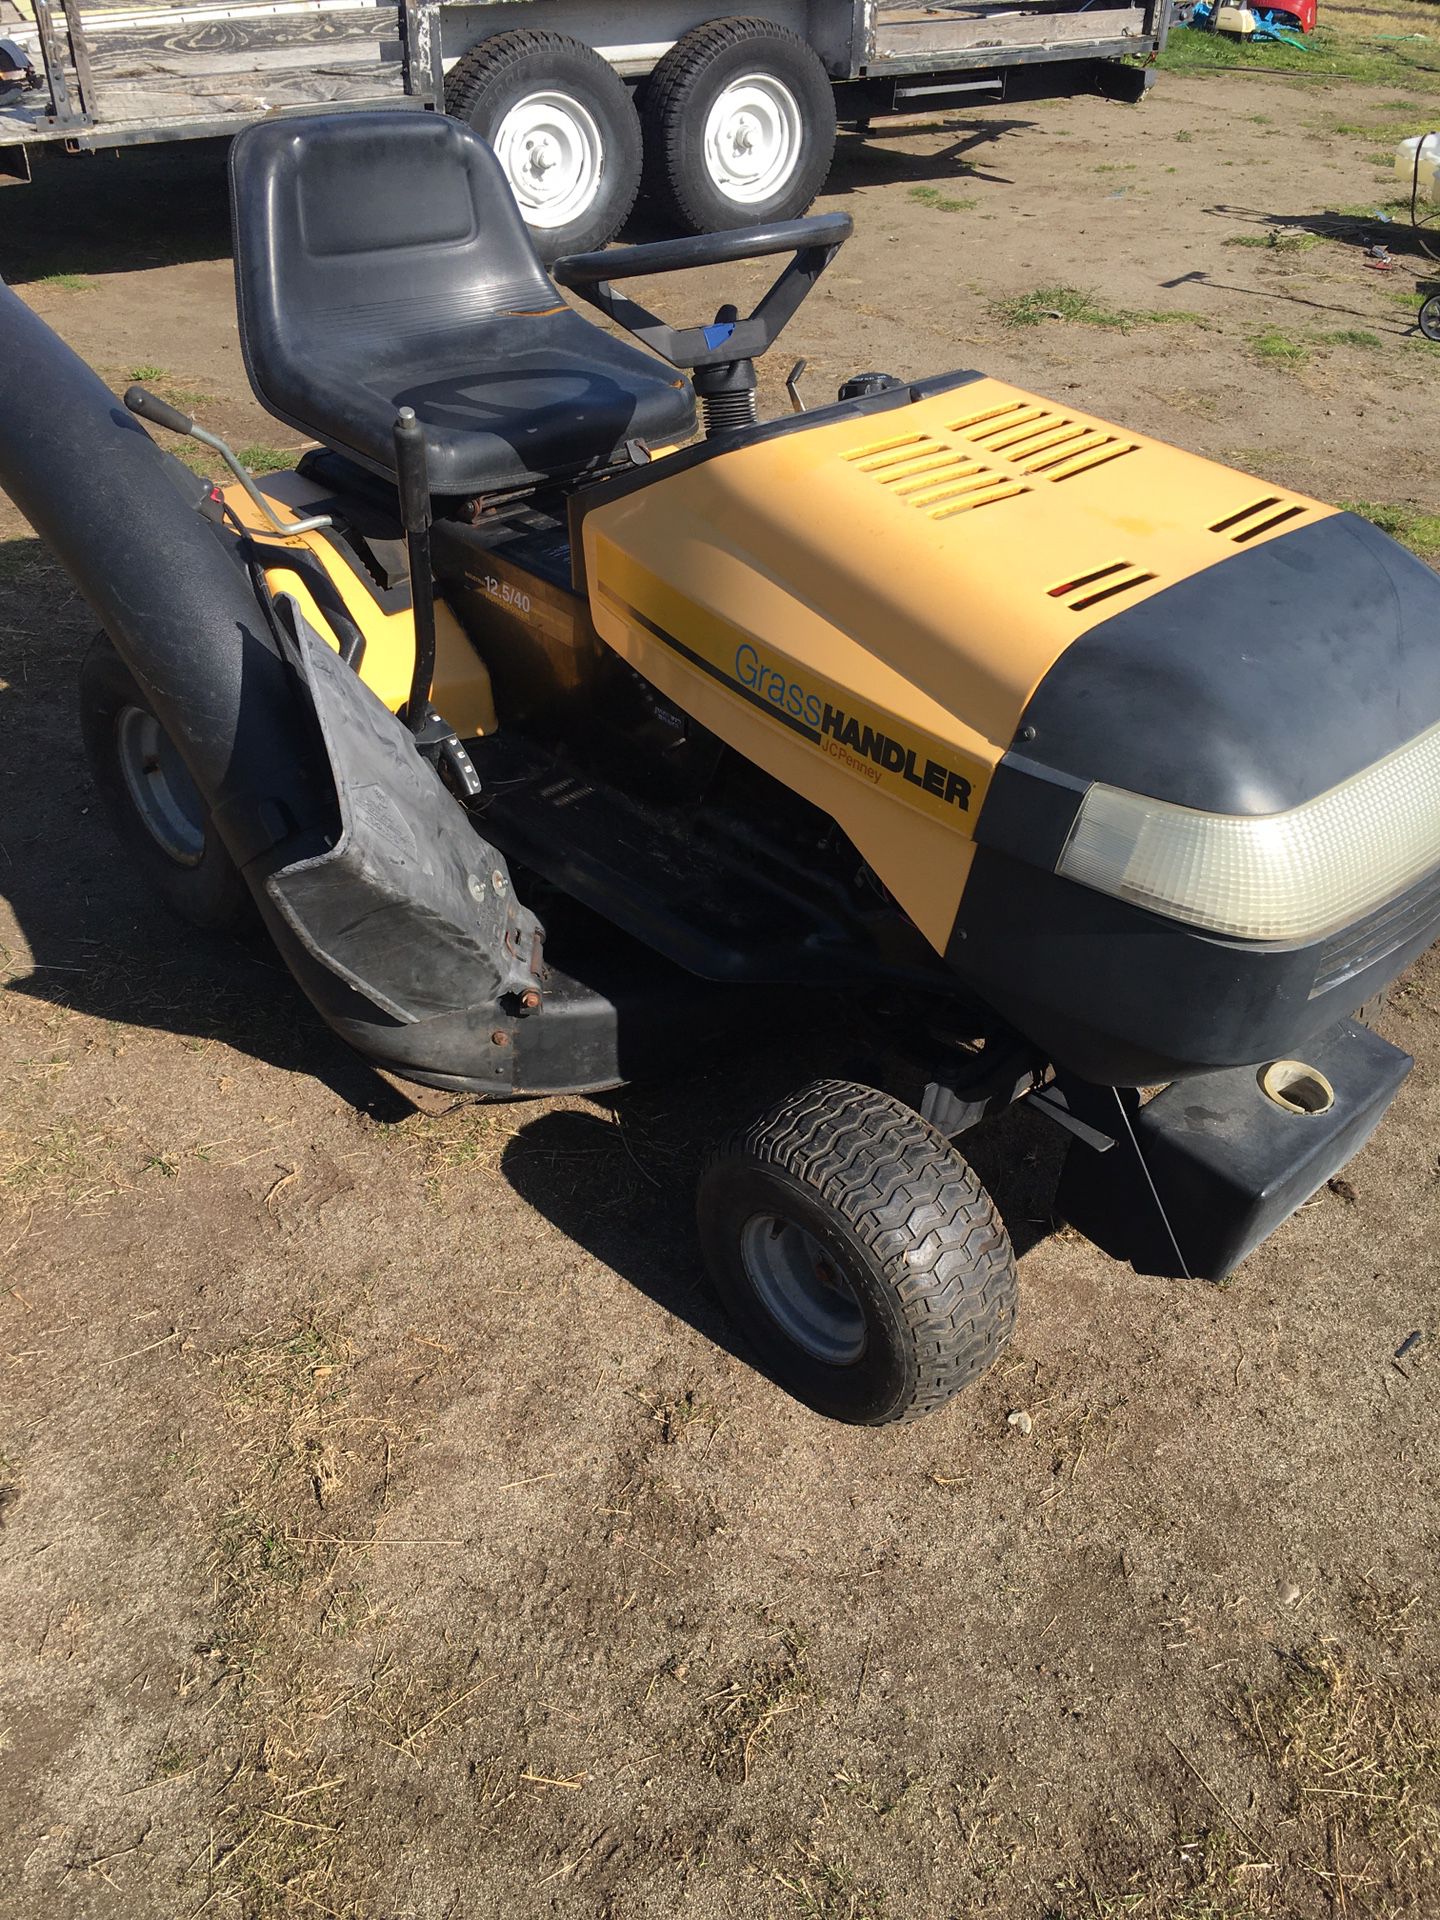 Riding lawn mower, penny’s , 12.5 Briggs-Stratton engine, six speed , easy to drive, mows nice, slow leak right front tire, half a bagger system just